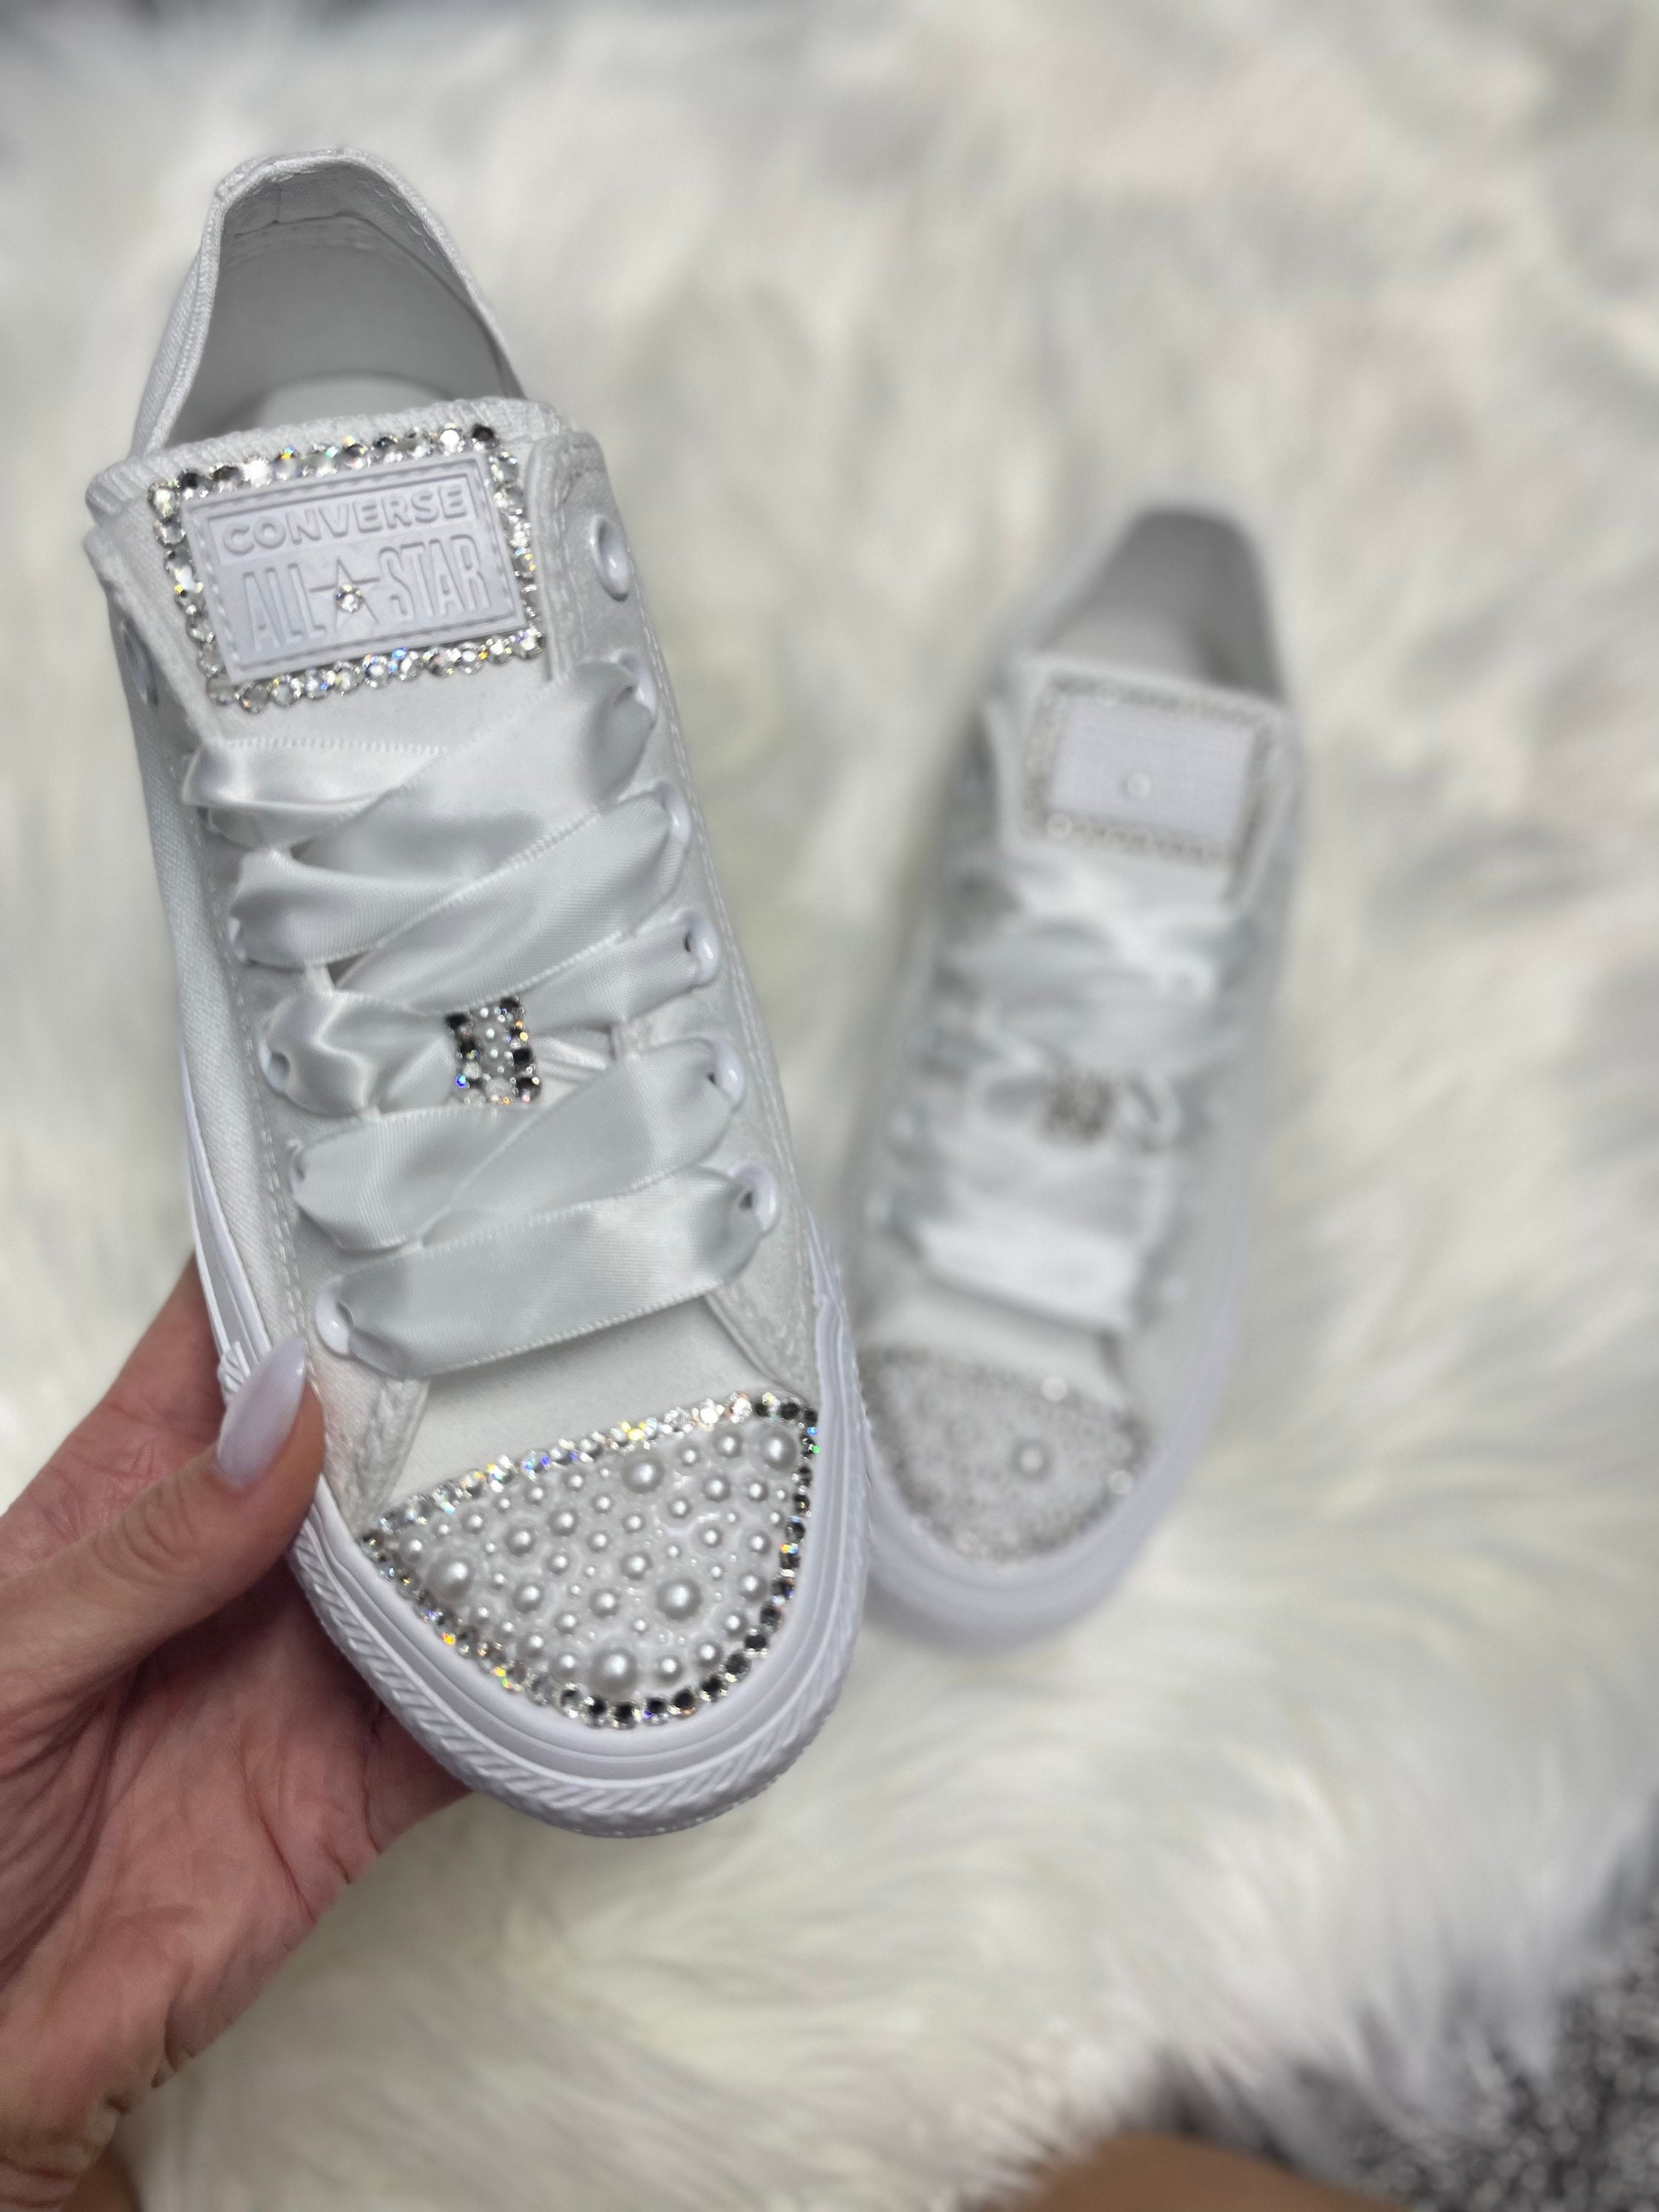 JEKO Women's Glitter Tennis Sneakers Floral Dressy Sparkly Sneakers  Rhinestone Bling Wedding Bridal Shoes Shiny Sequin Shoes